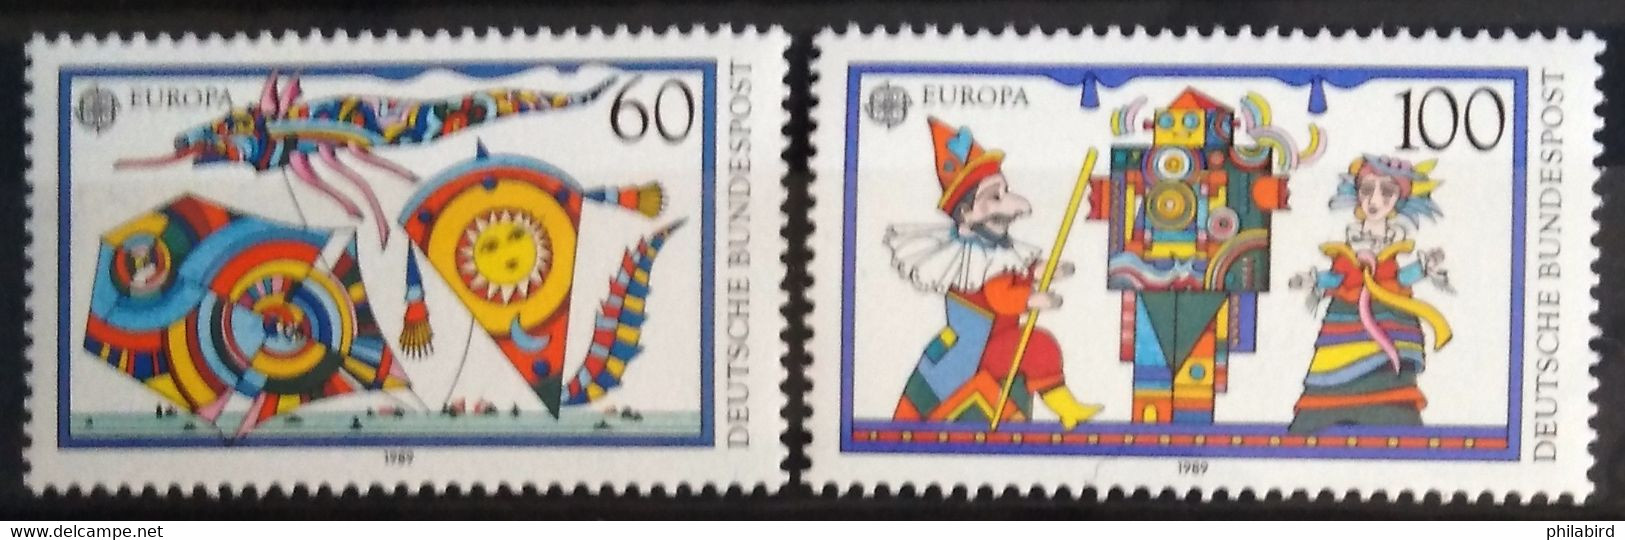 EUROPA 1989 - ALLEMAGNE                    N° 1249/1250                        NEUF** - 1989